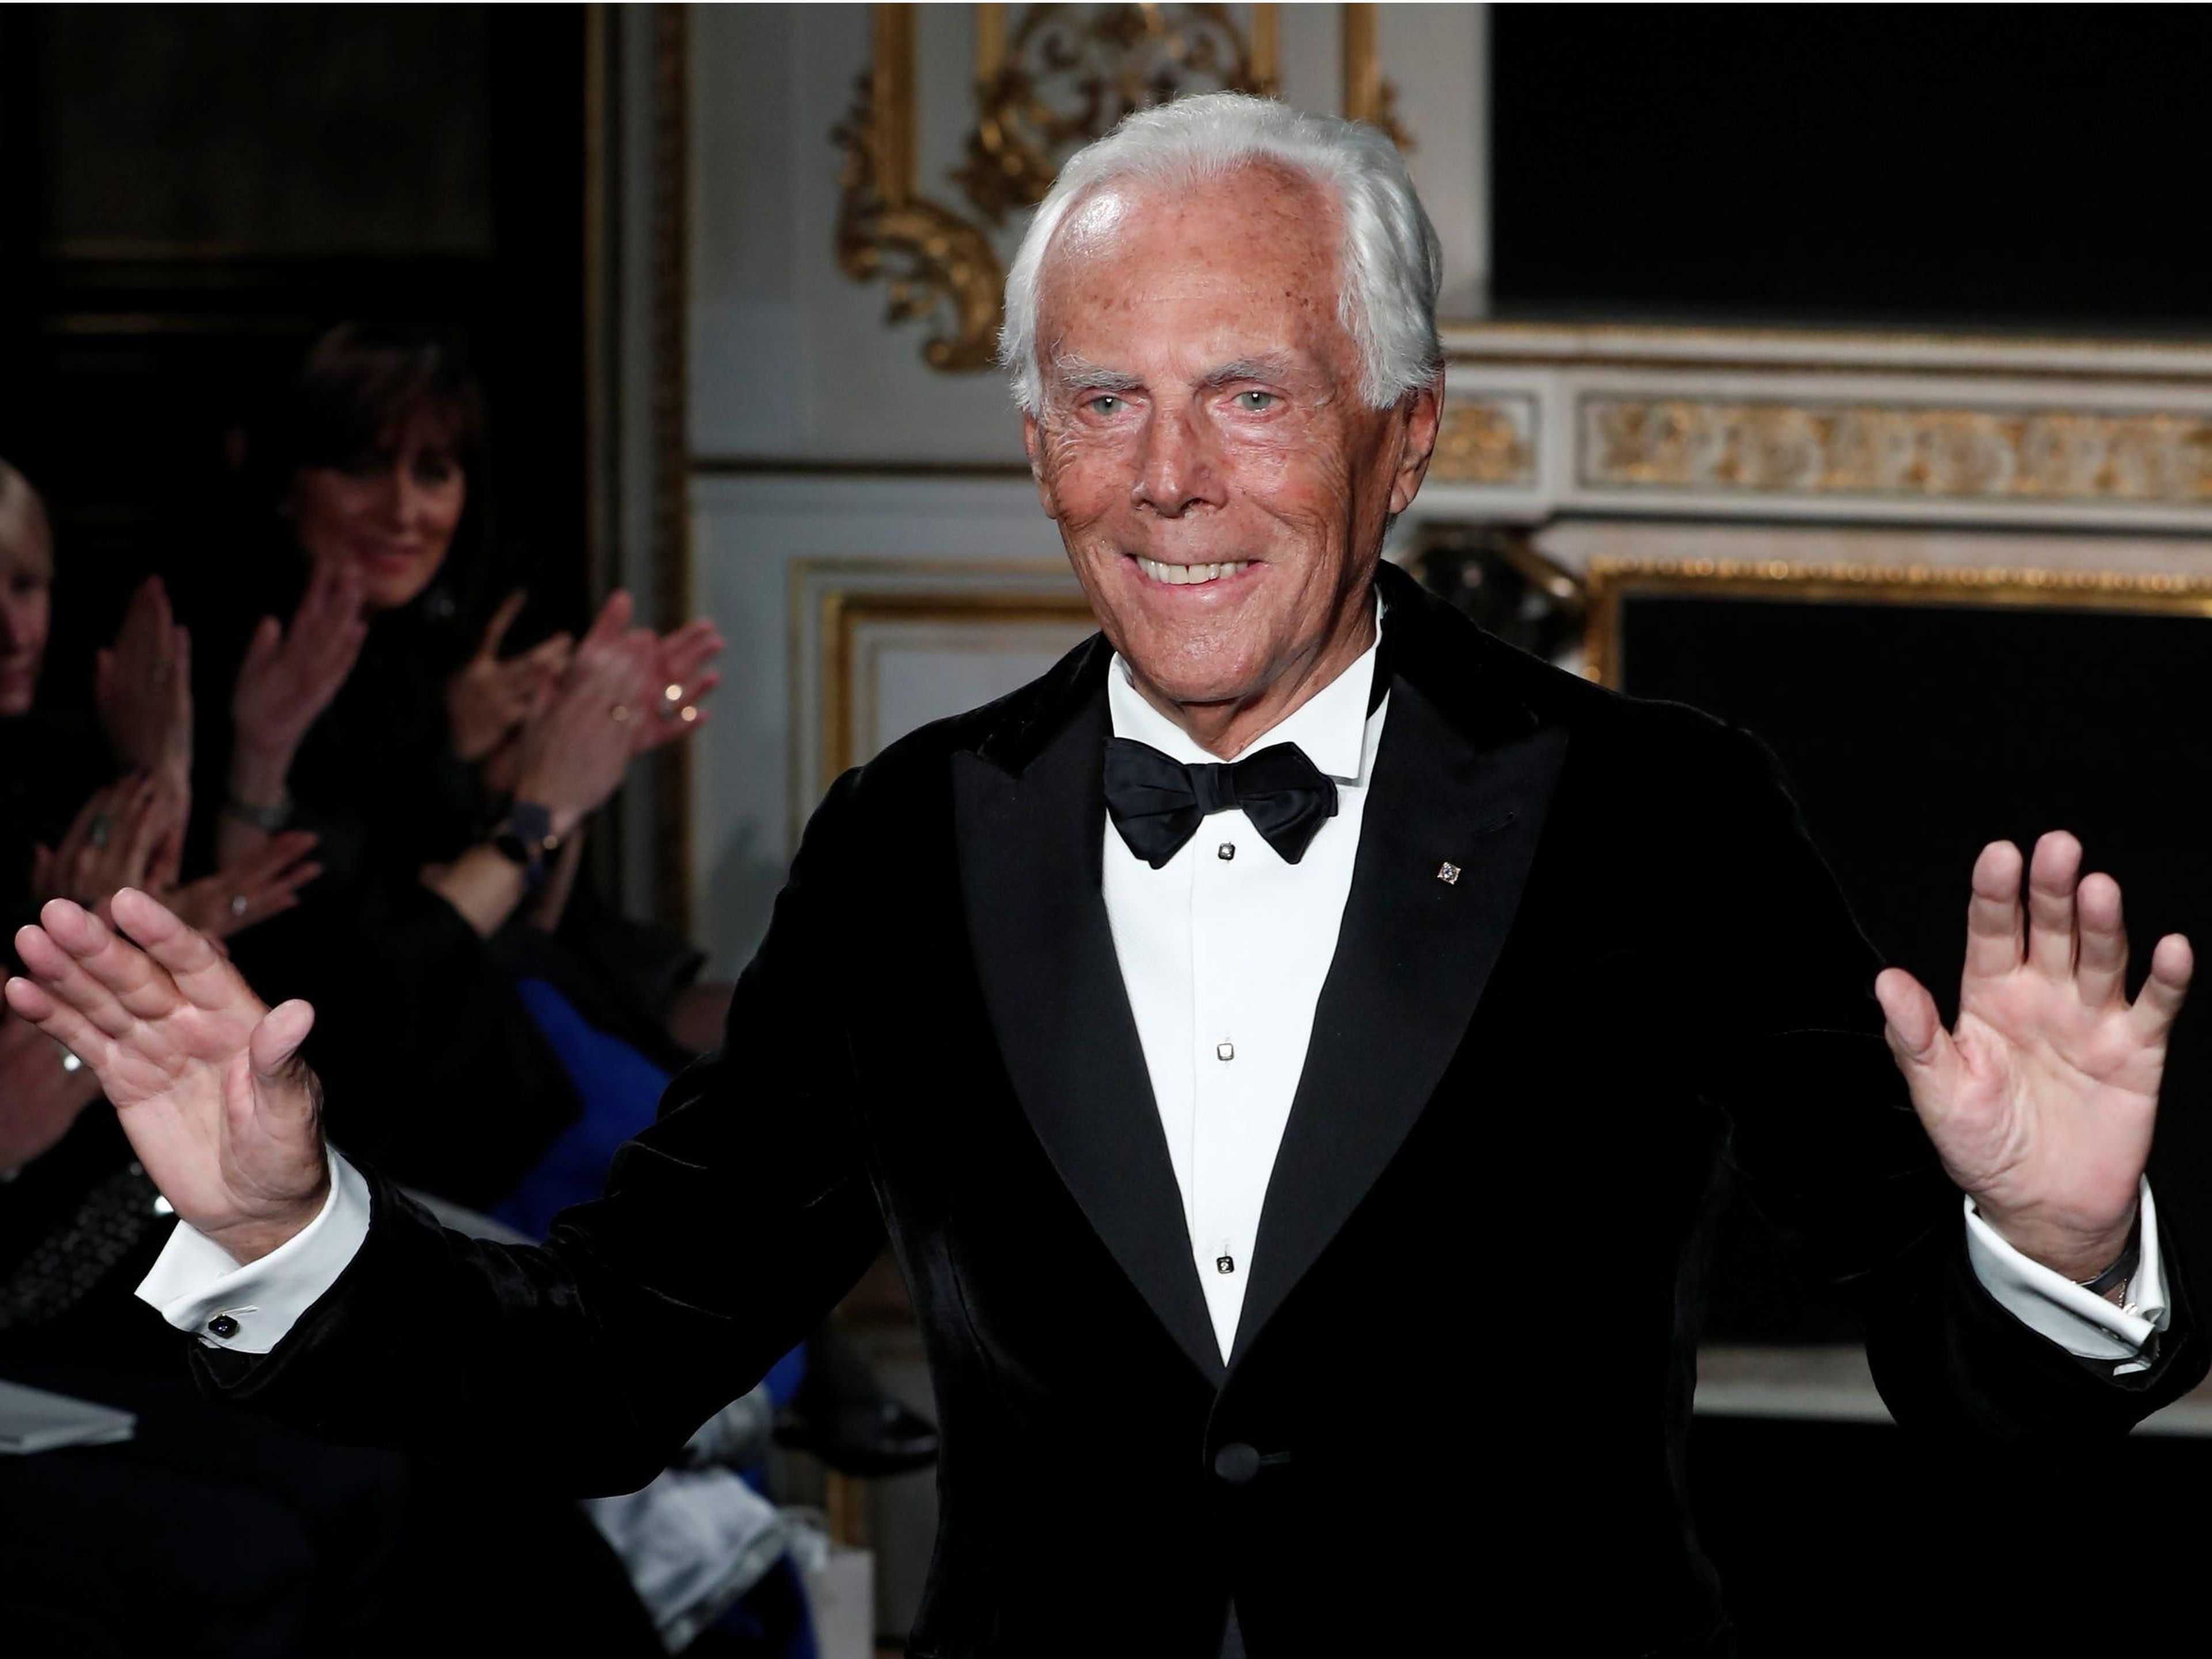 Giorgio Armani is one of the richest people in fashion. How the 86-year-old designer spends his billions, from a 213-foot yacht to homes in Italy, NYC, and the Caribbean.